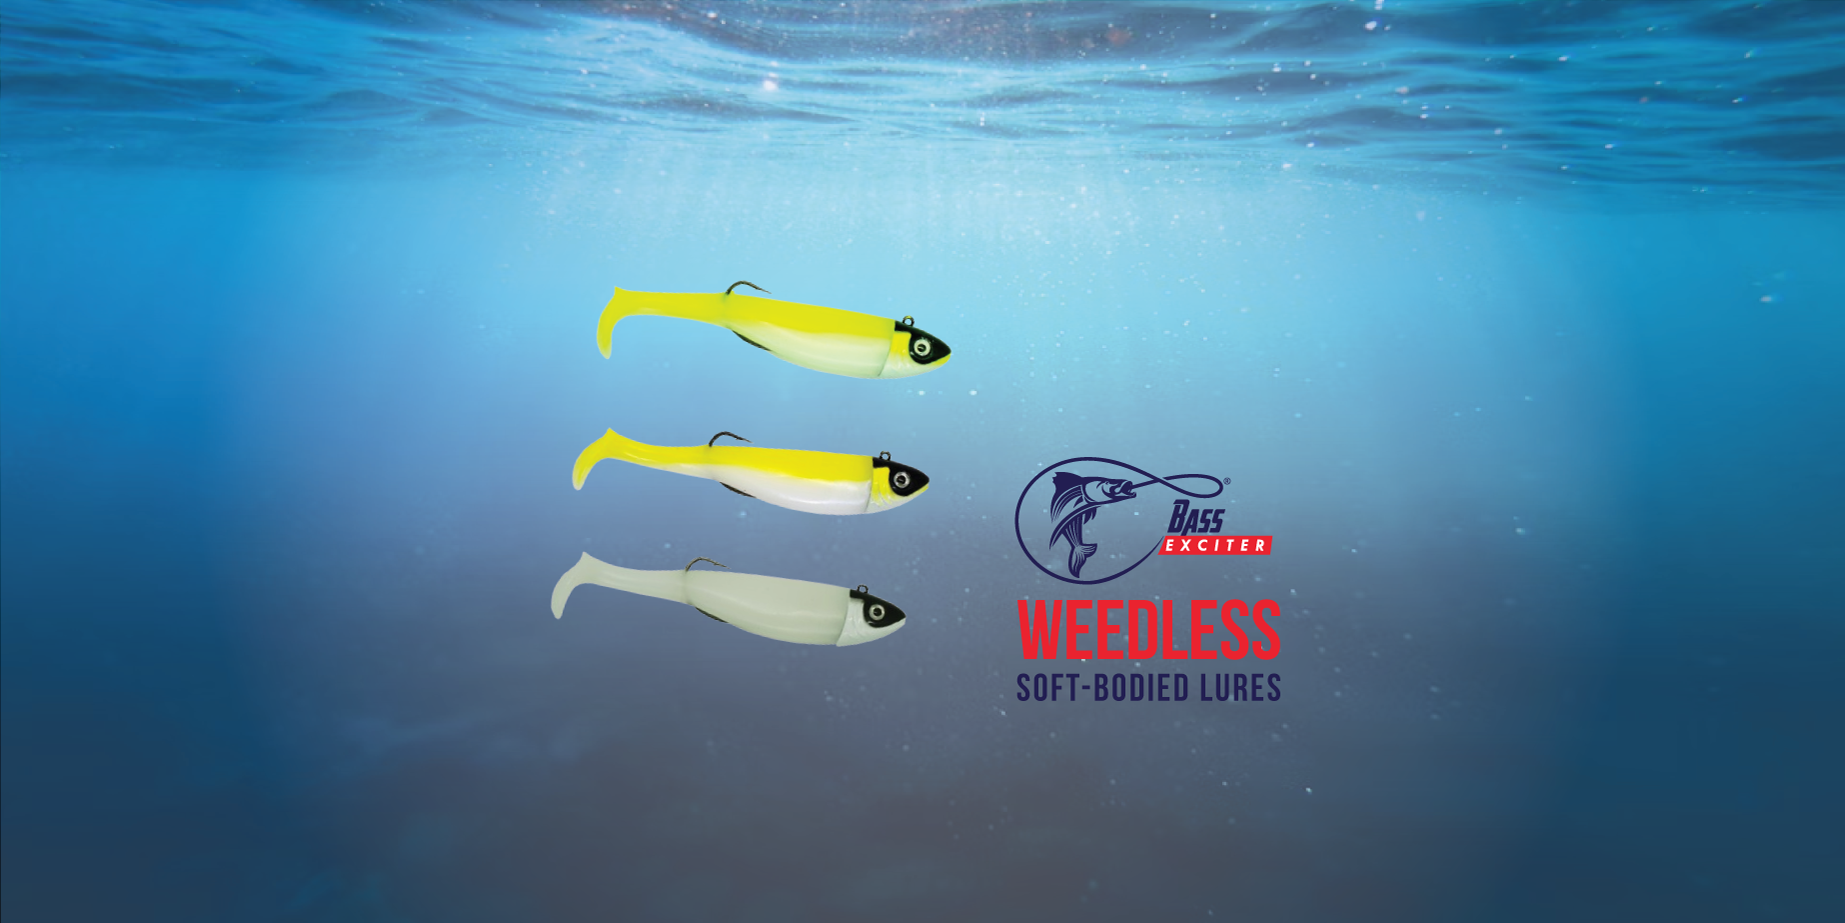 Weedless-soft-bodied-lures